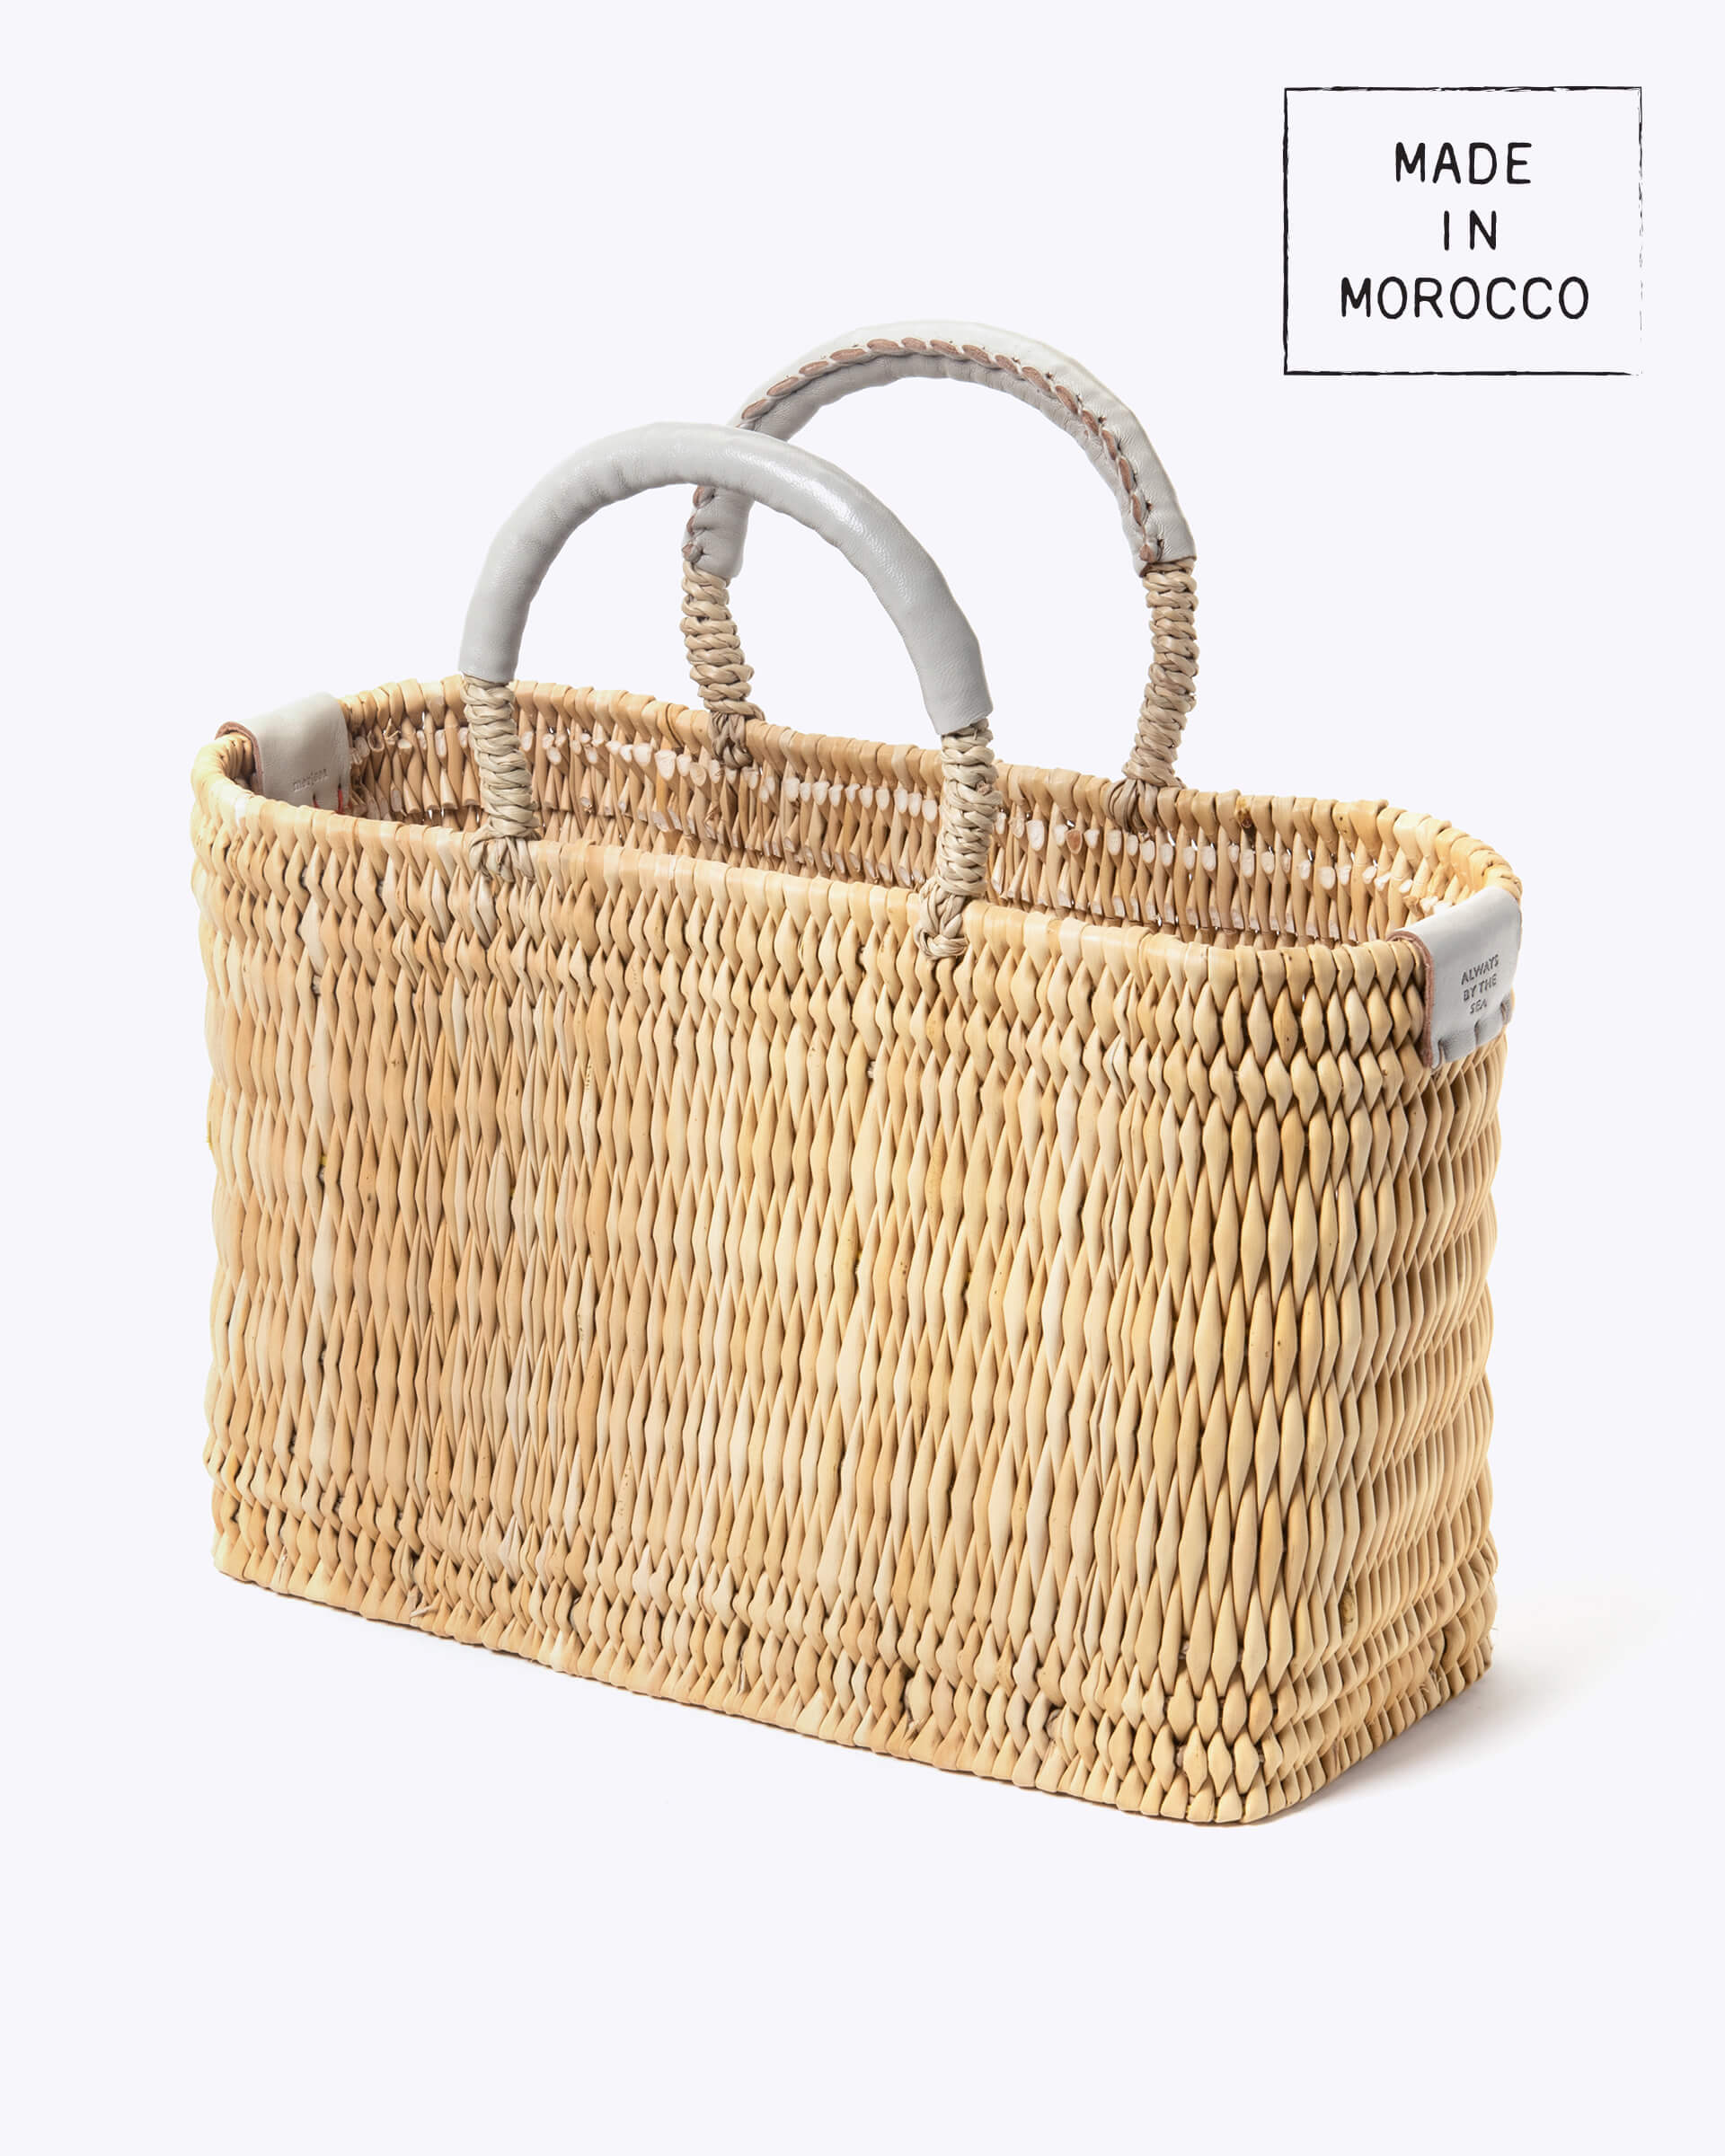 small straw basket wrapped with neutral colored leather handled on a white background at an angle